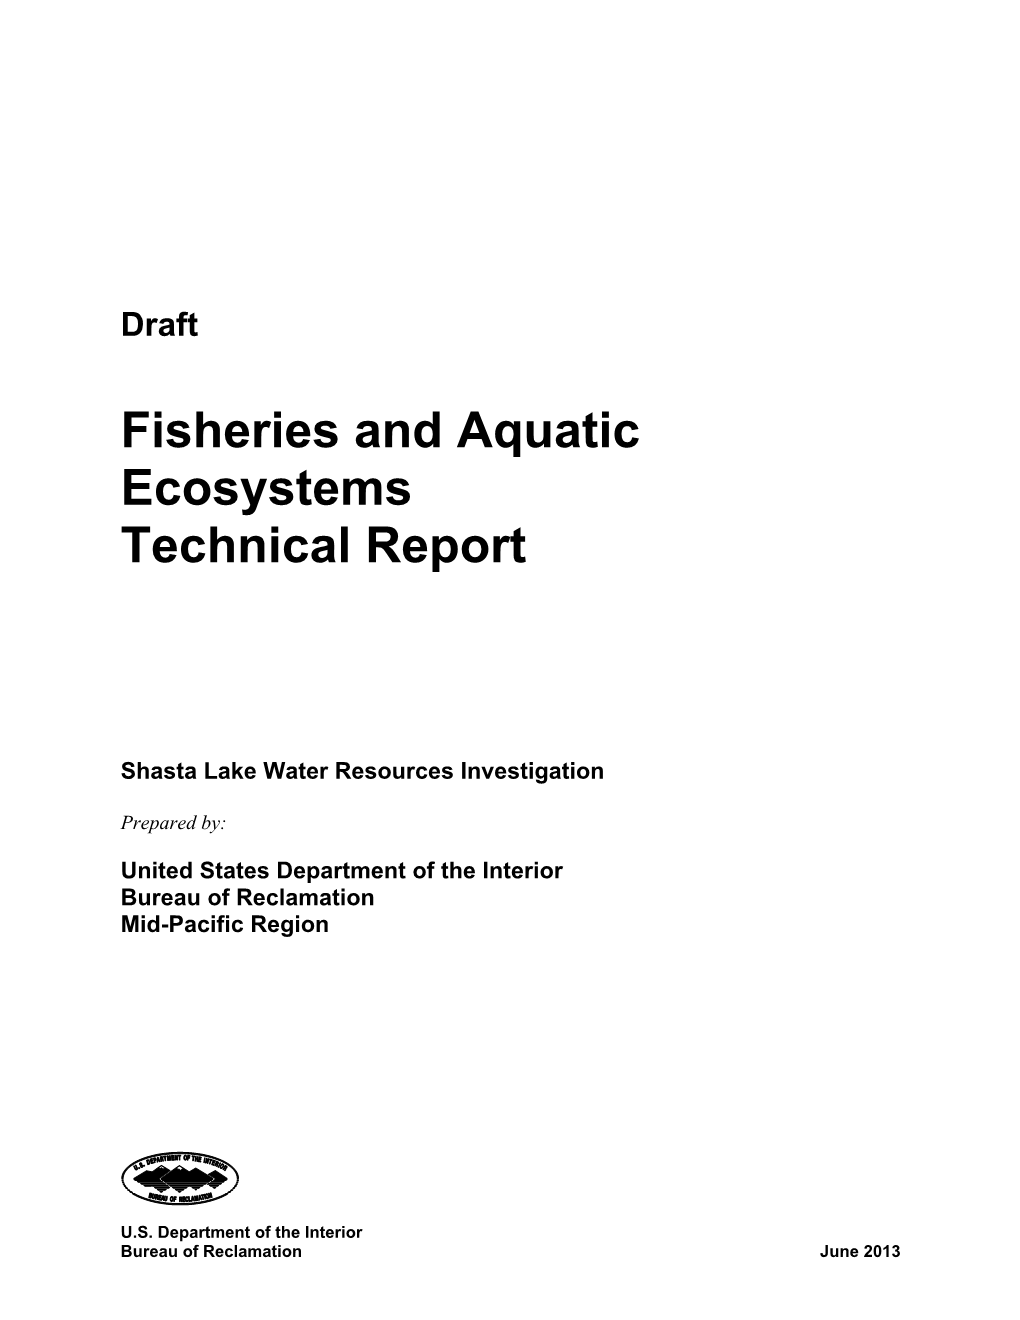 Fisheries and Aquatic Ecosystems Technical Report